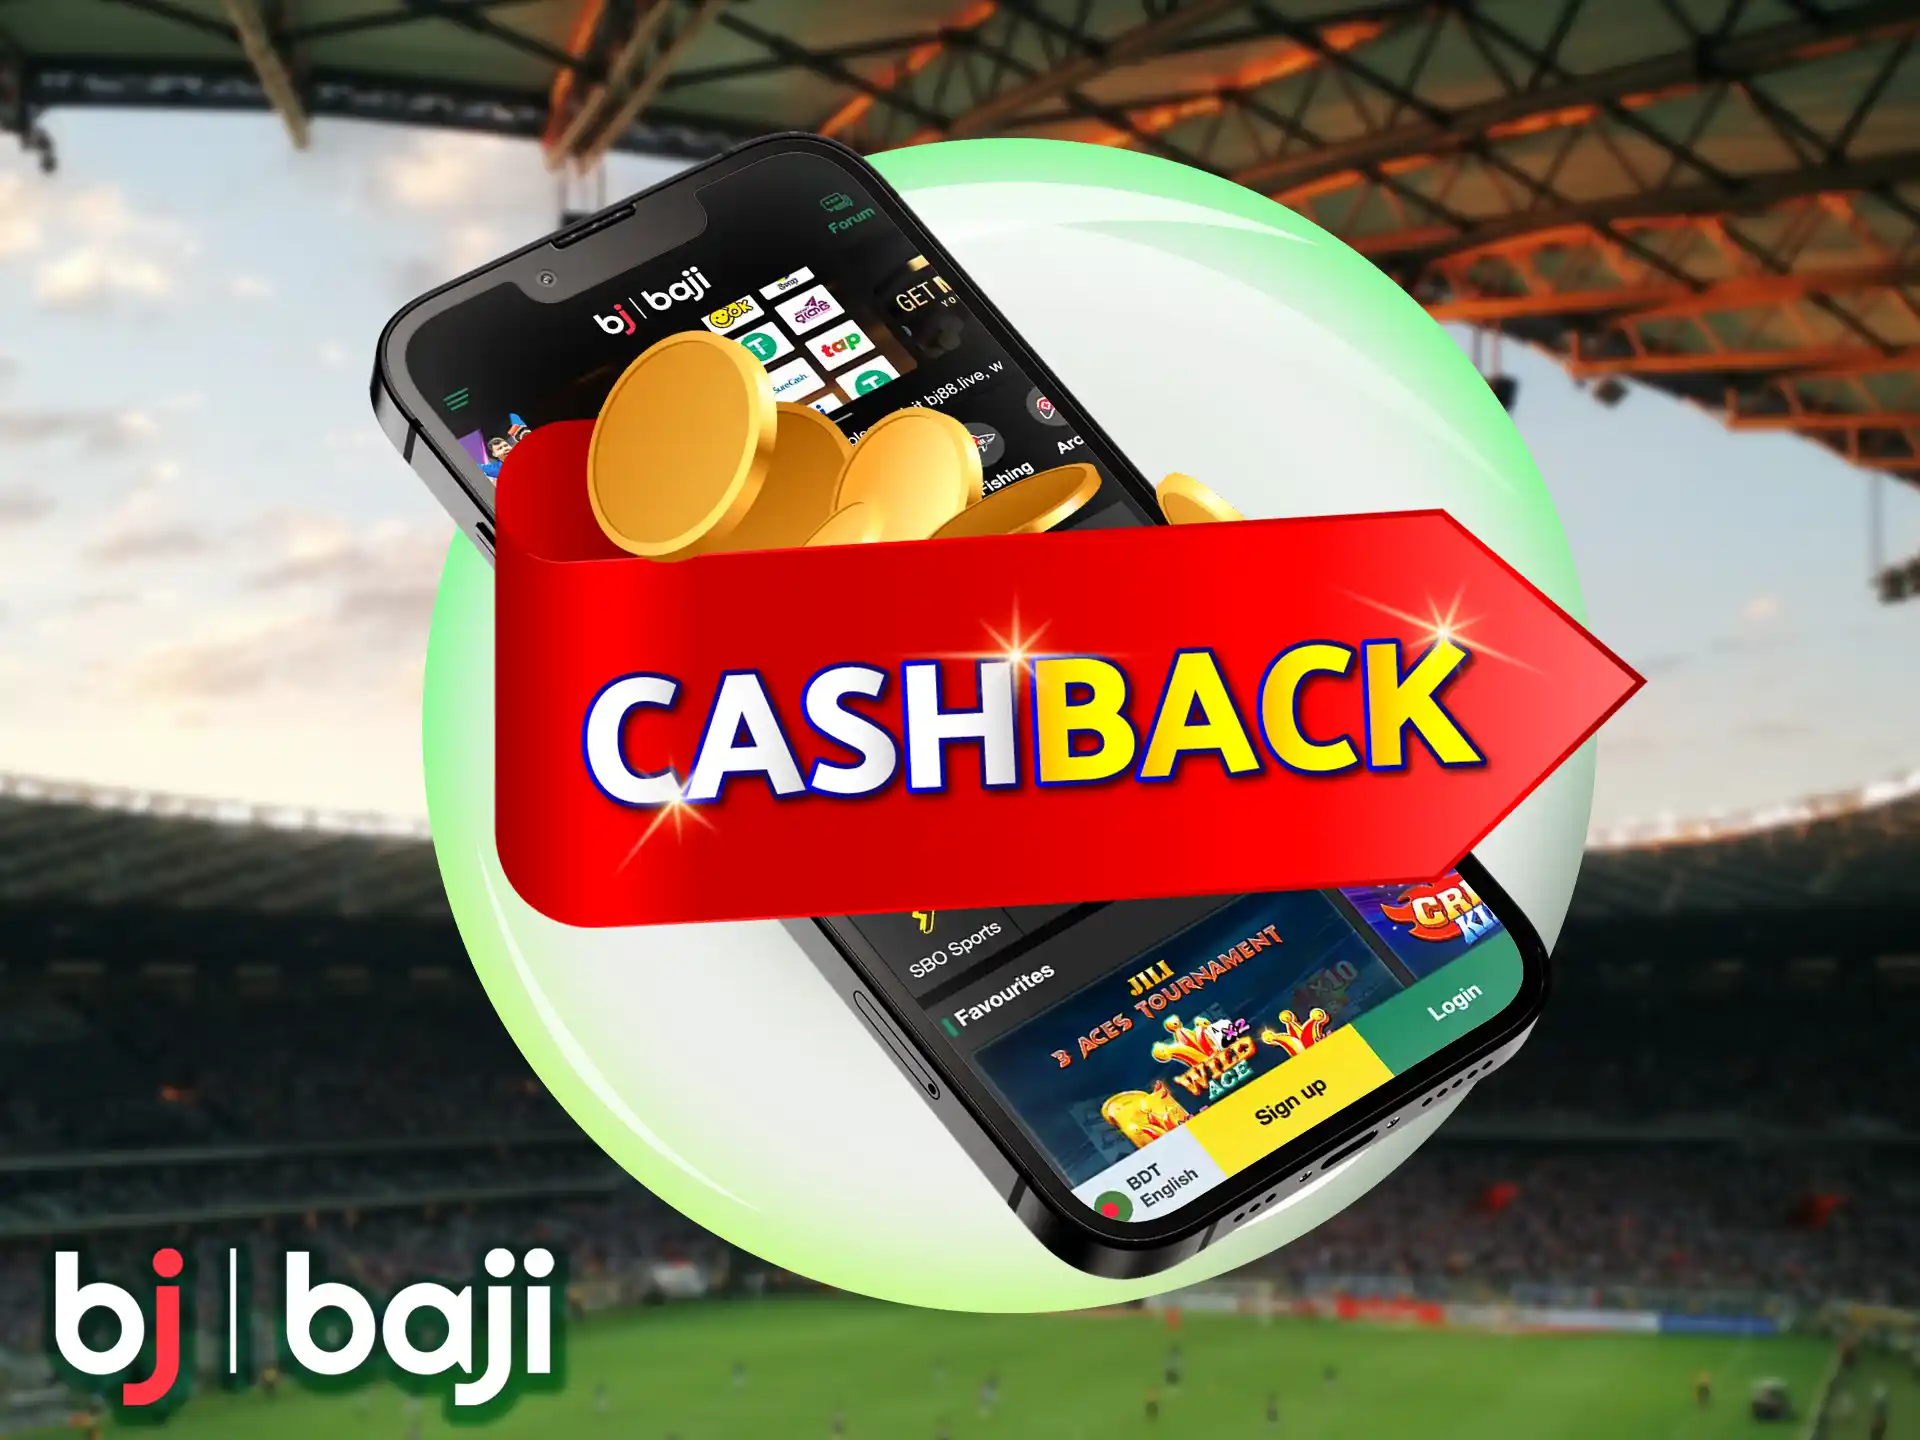 Play effectively at Baji here you can get a solid return percentage within 24 hours.